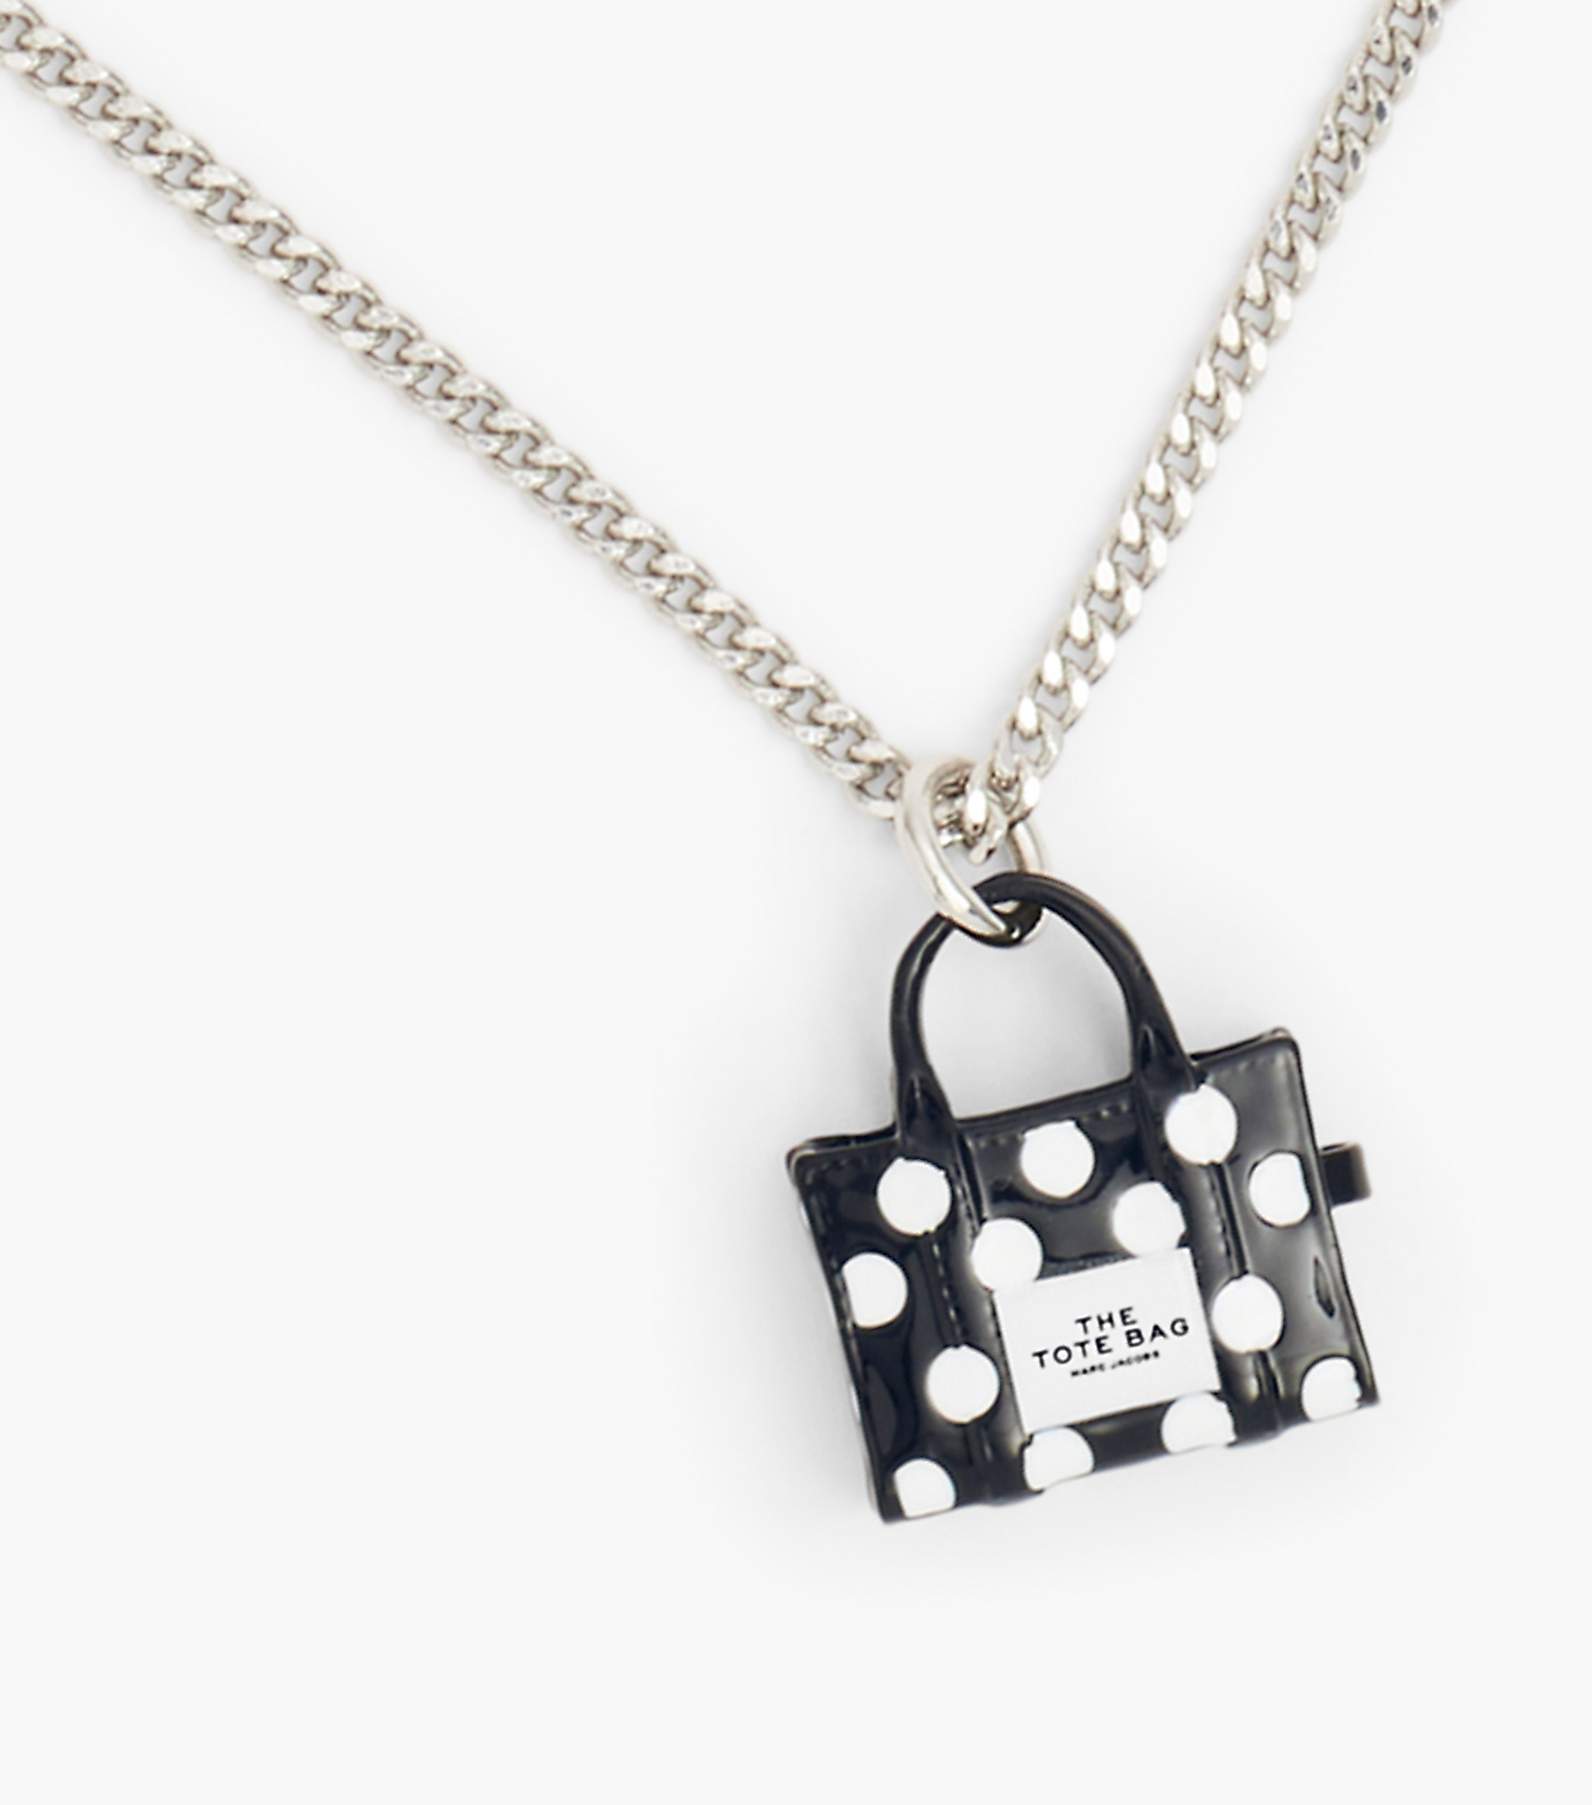 Marc Jacobs Silver Polka Dot Tote Pendant Necklace